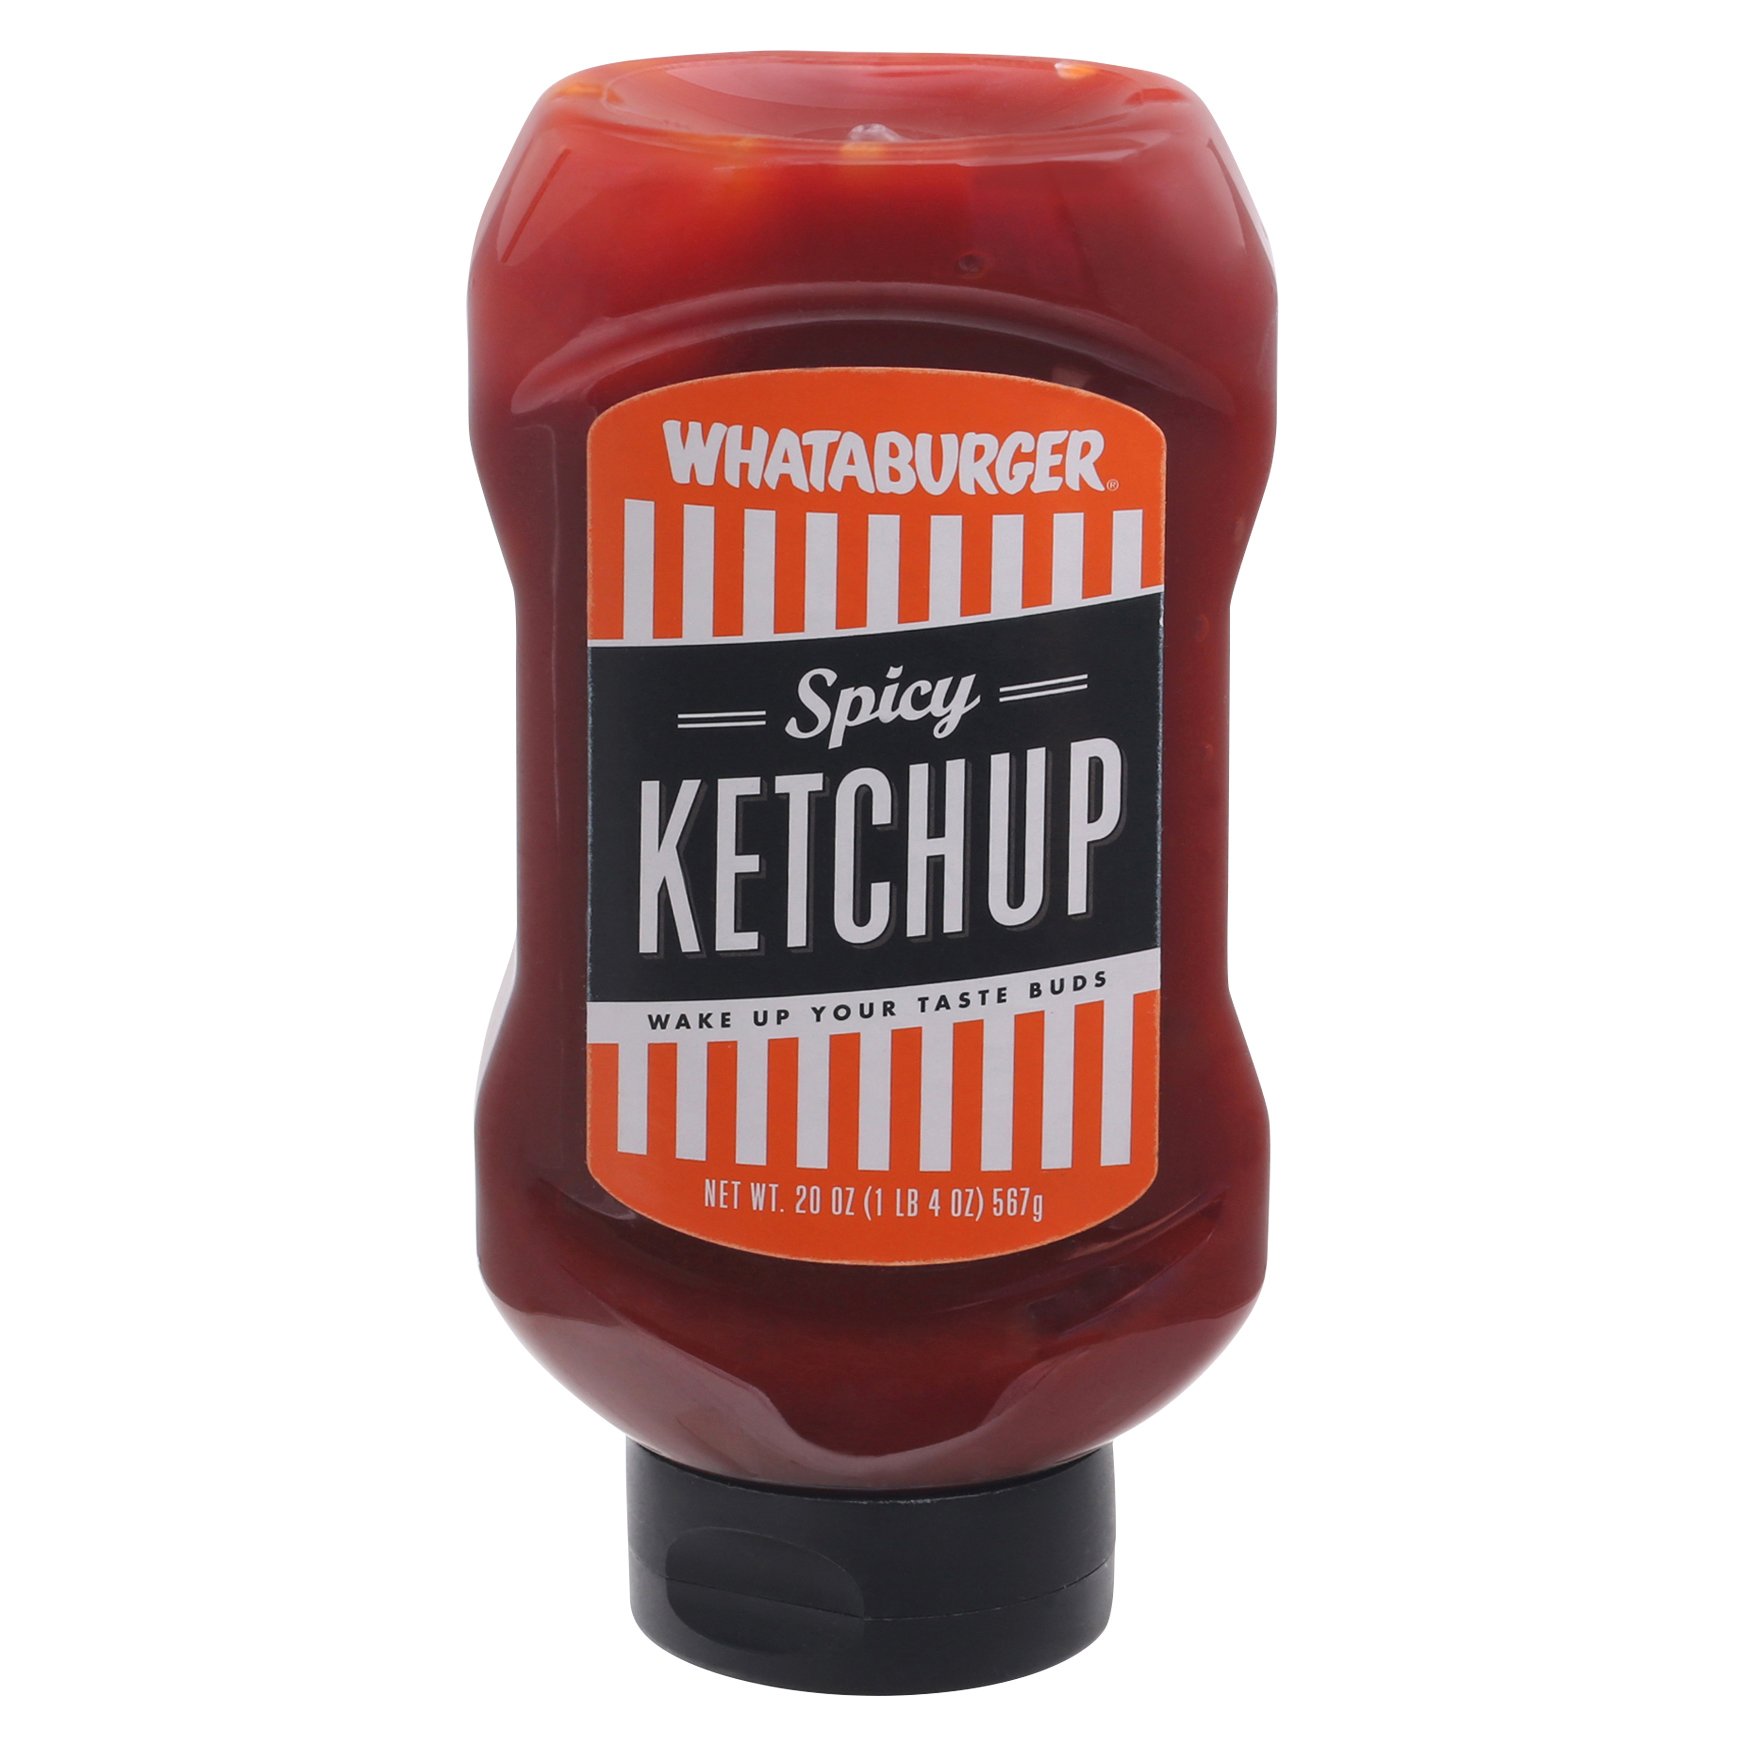 Whataburger *NEW* Spicy Ketchup Limited Batch #2 REVIEW- brickeats 